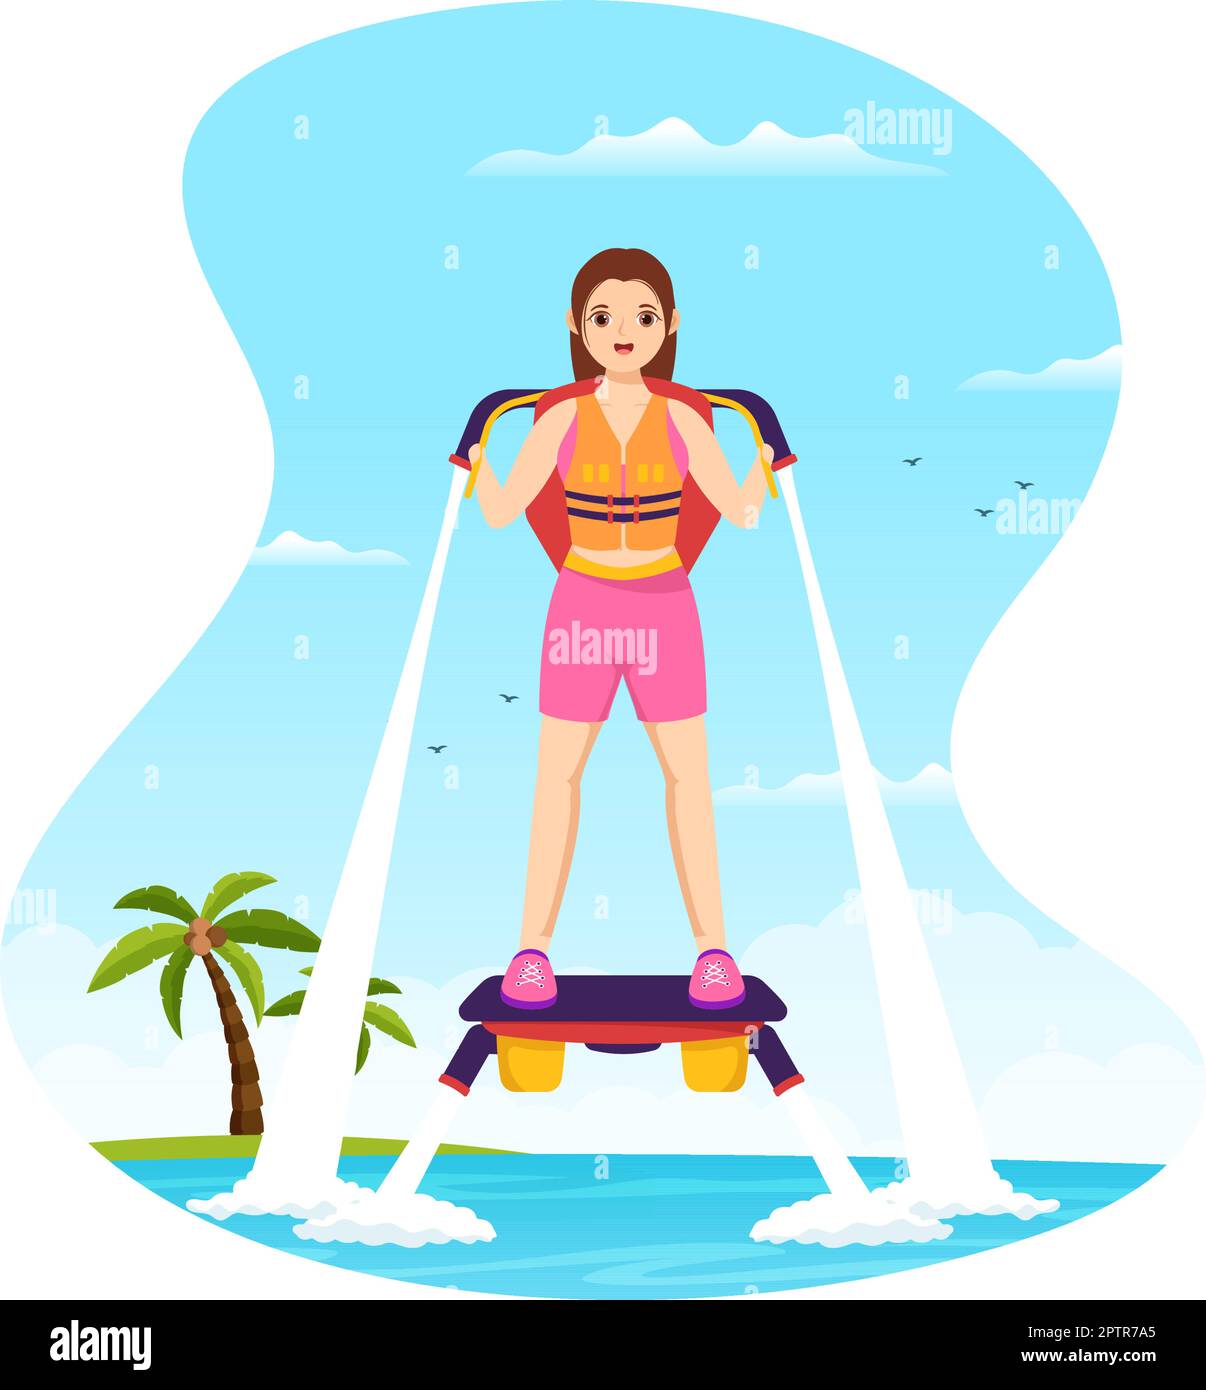 Flyboard Illustration with People Riding Jet Pack in Summer Beach Vacations in Flat Extreme Water Sport Activity Cartoon Hand Drawn Templates Stock Vector